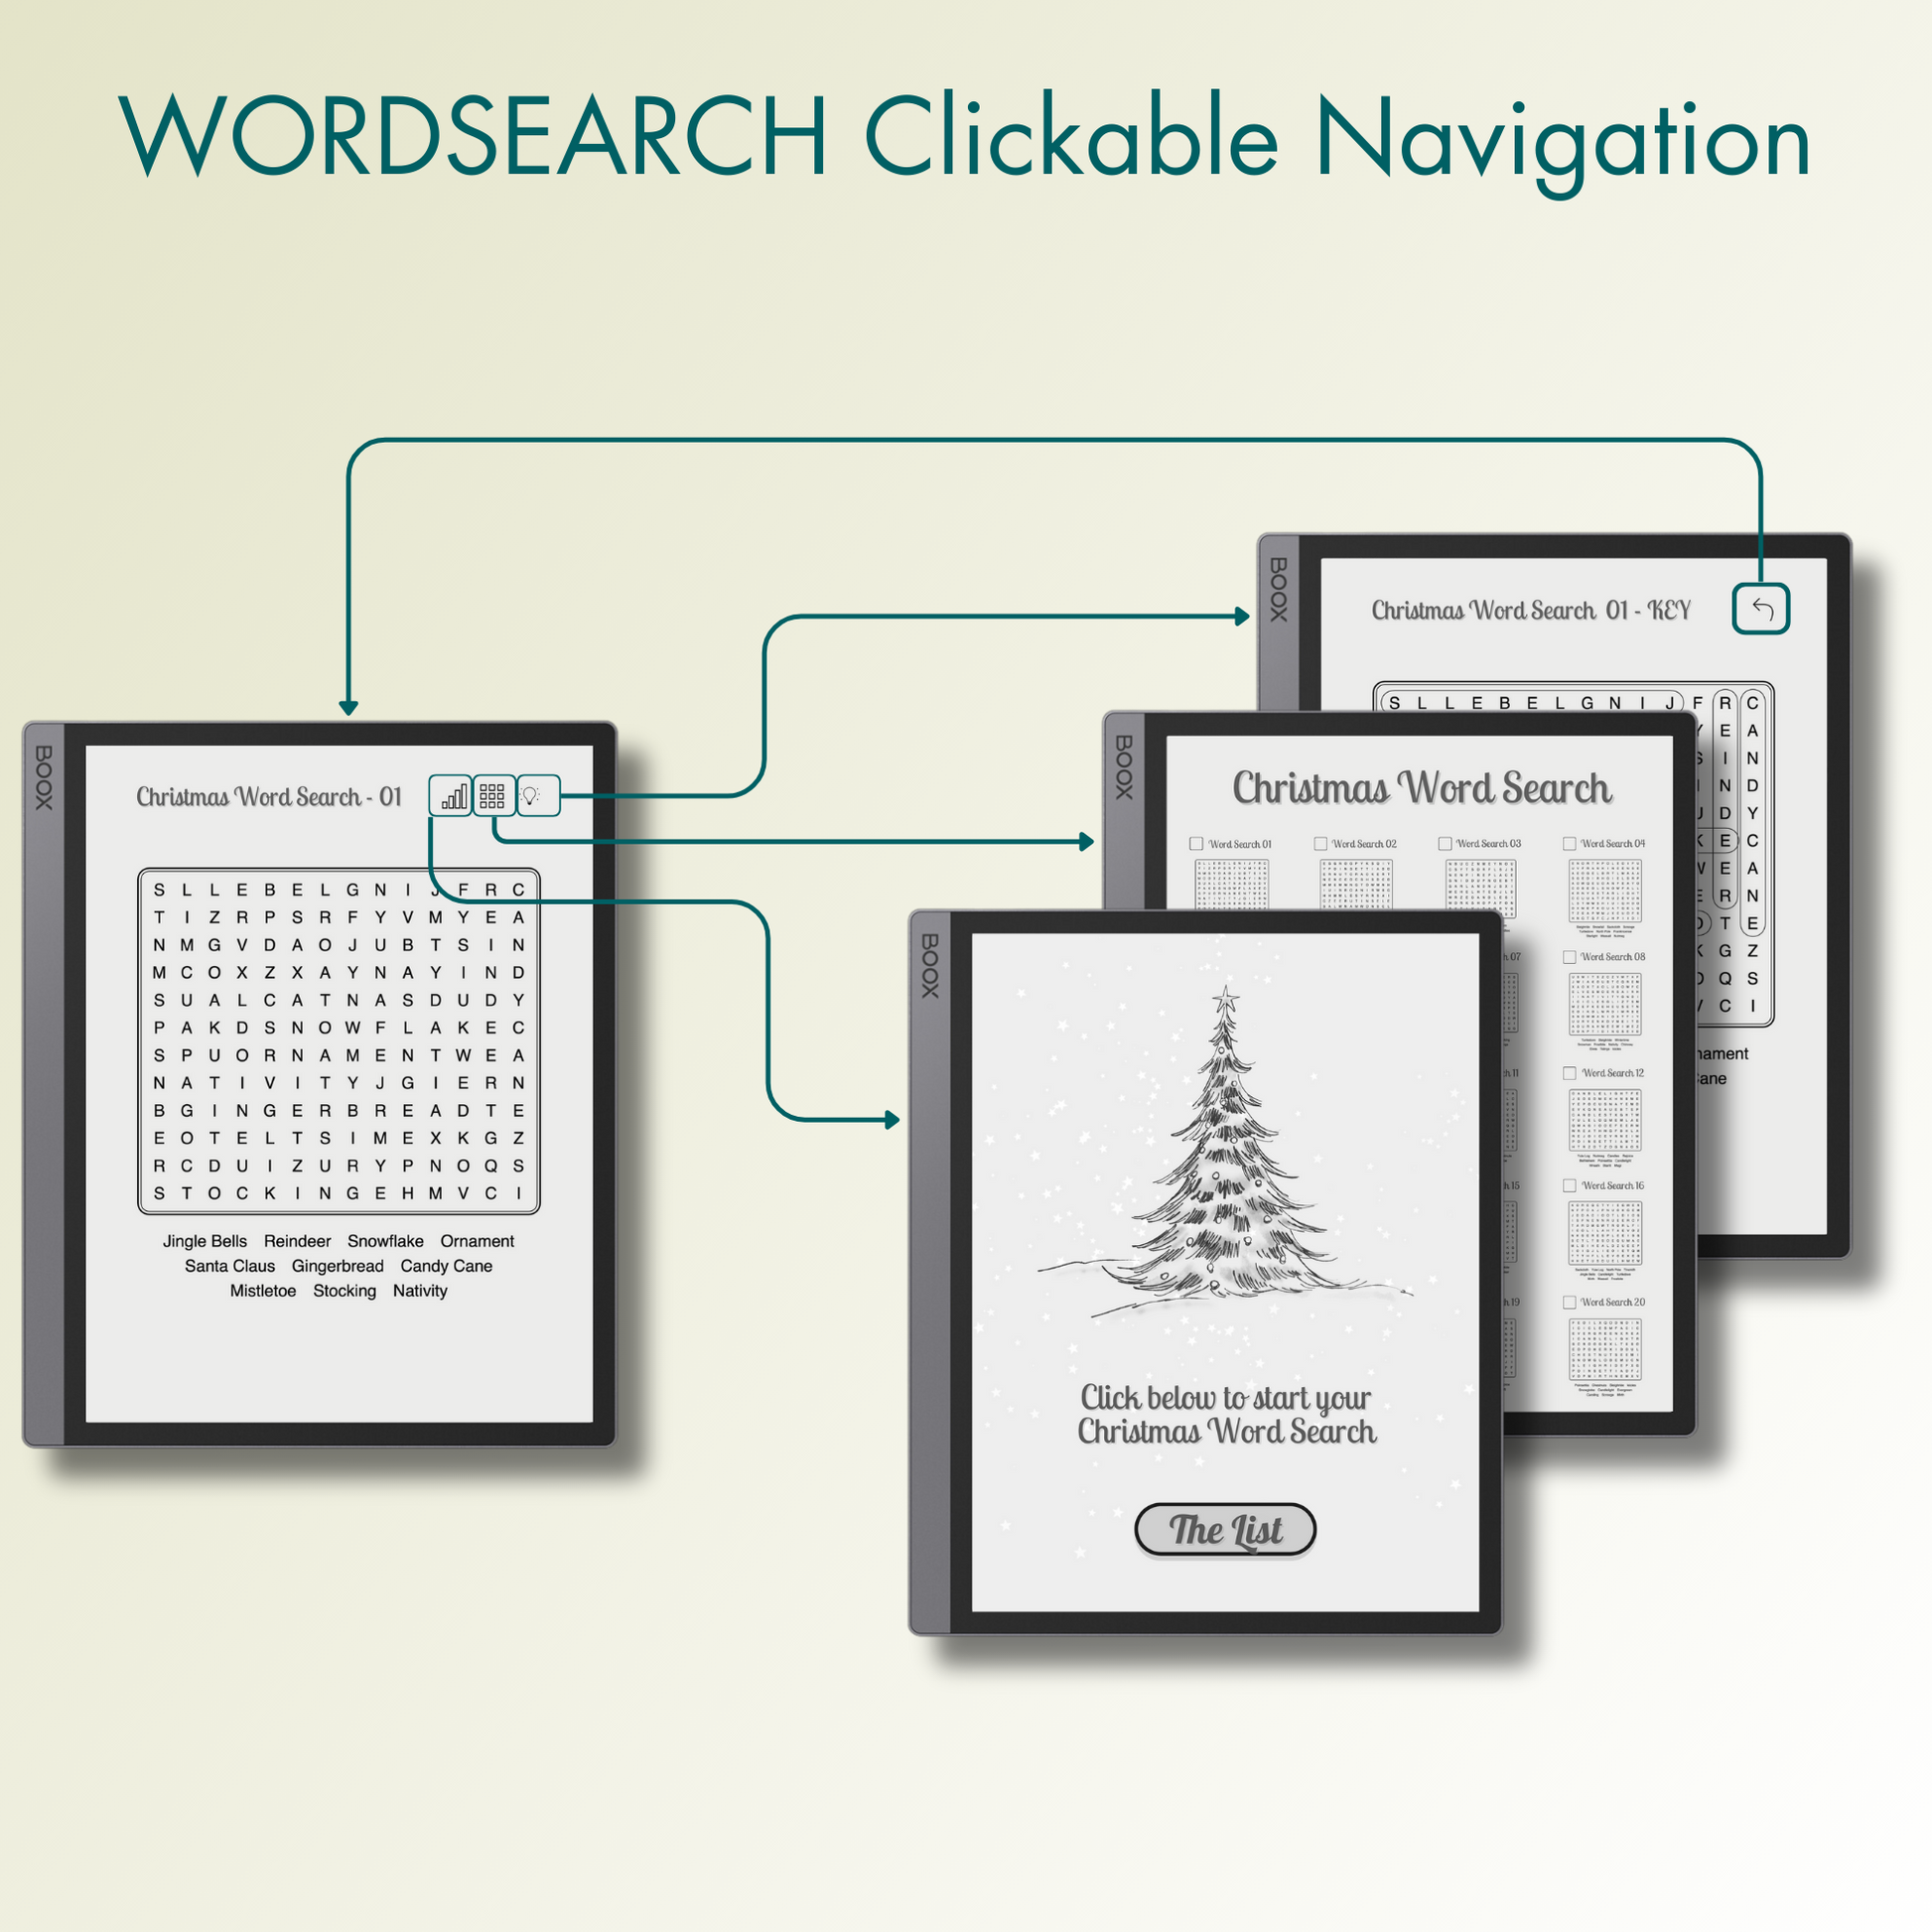 Onyx Boox Christmas Word Search Puzzles with full reference links.